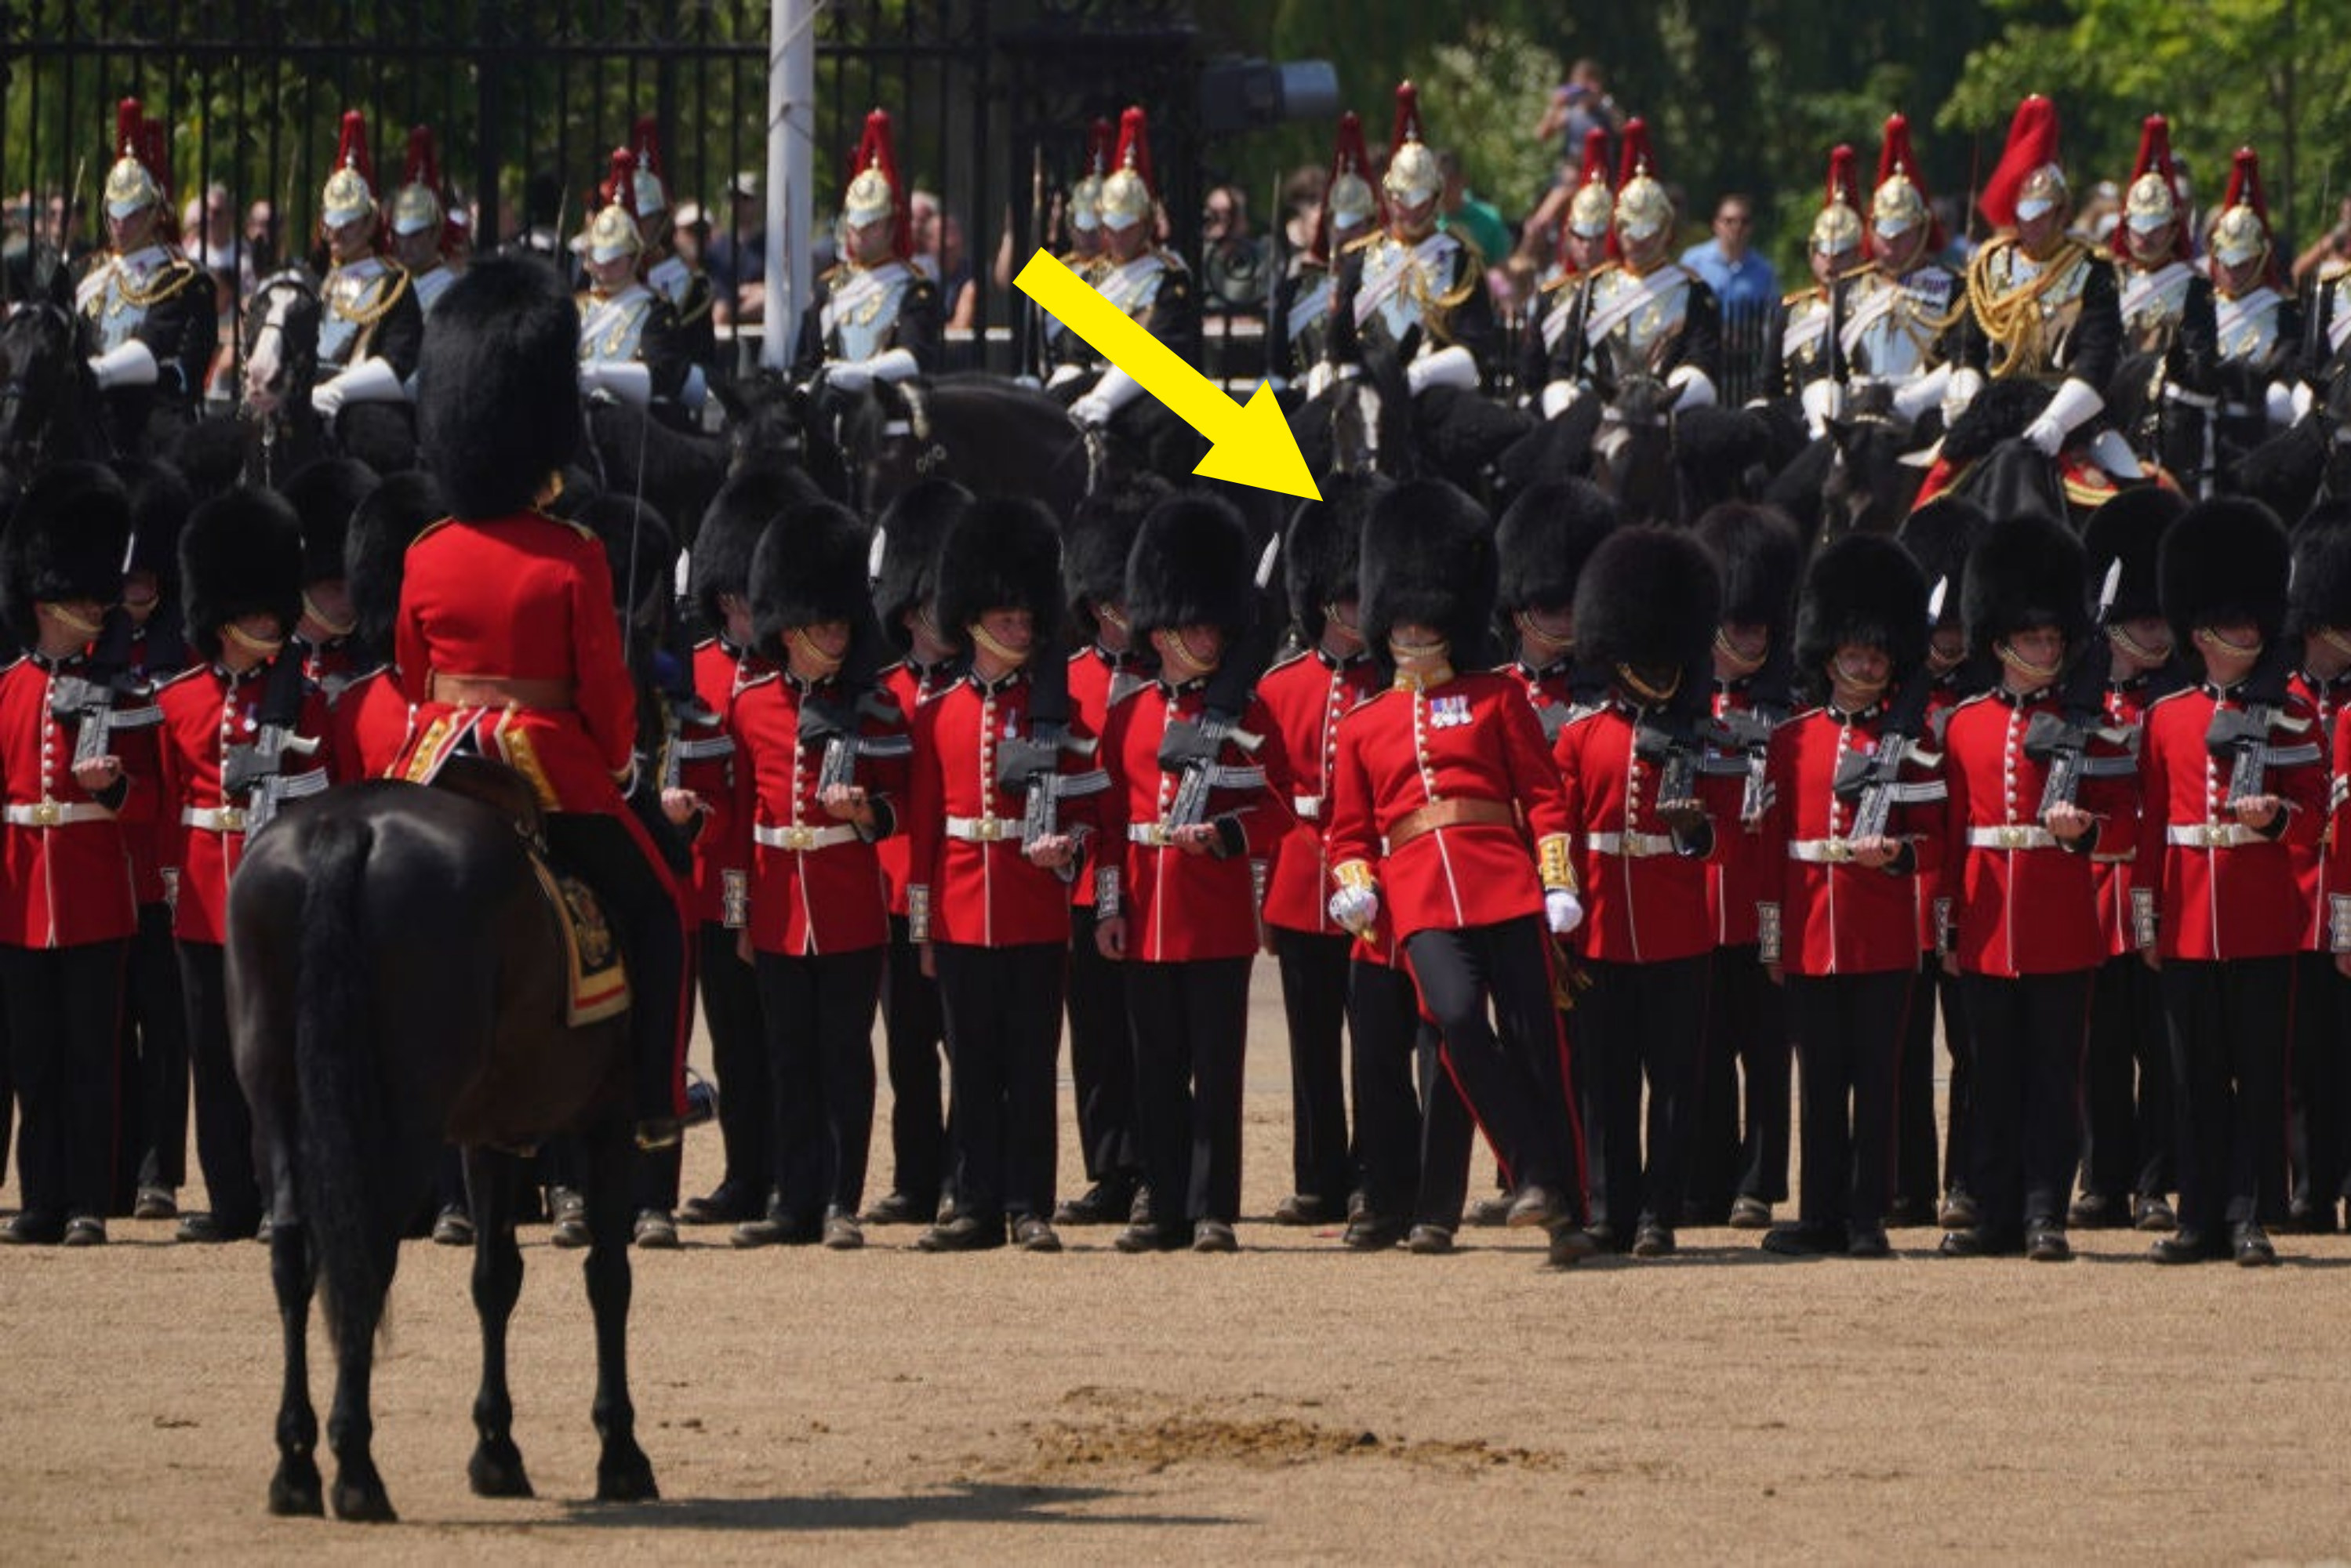 A member of the Coldstream Guards falling